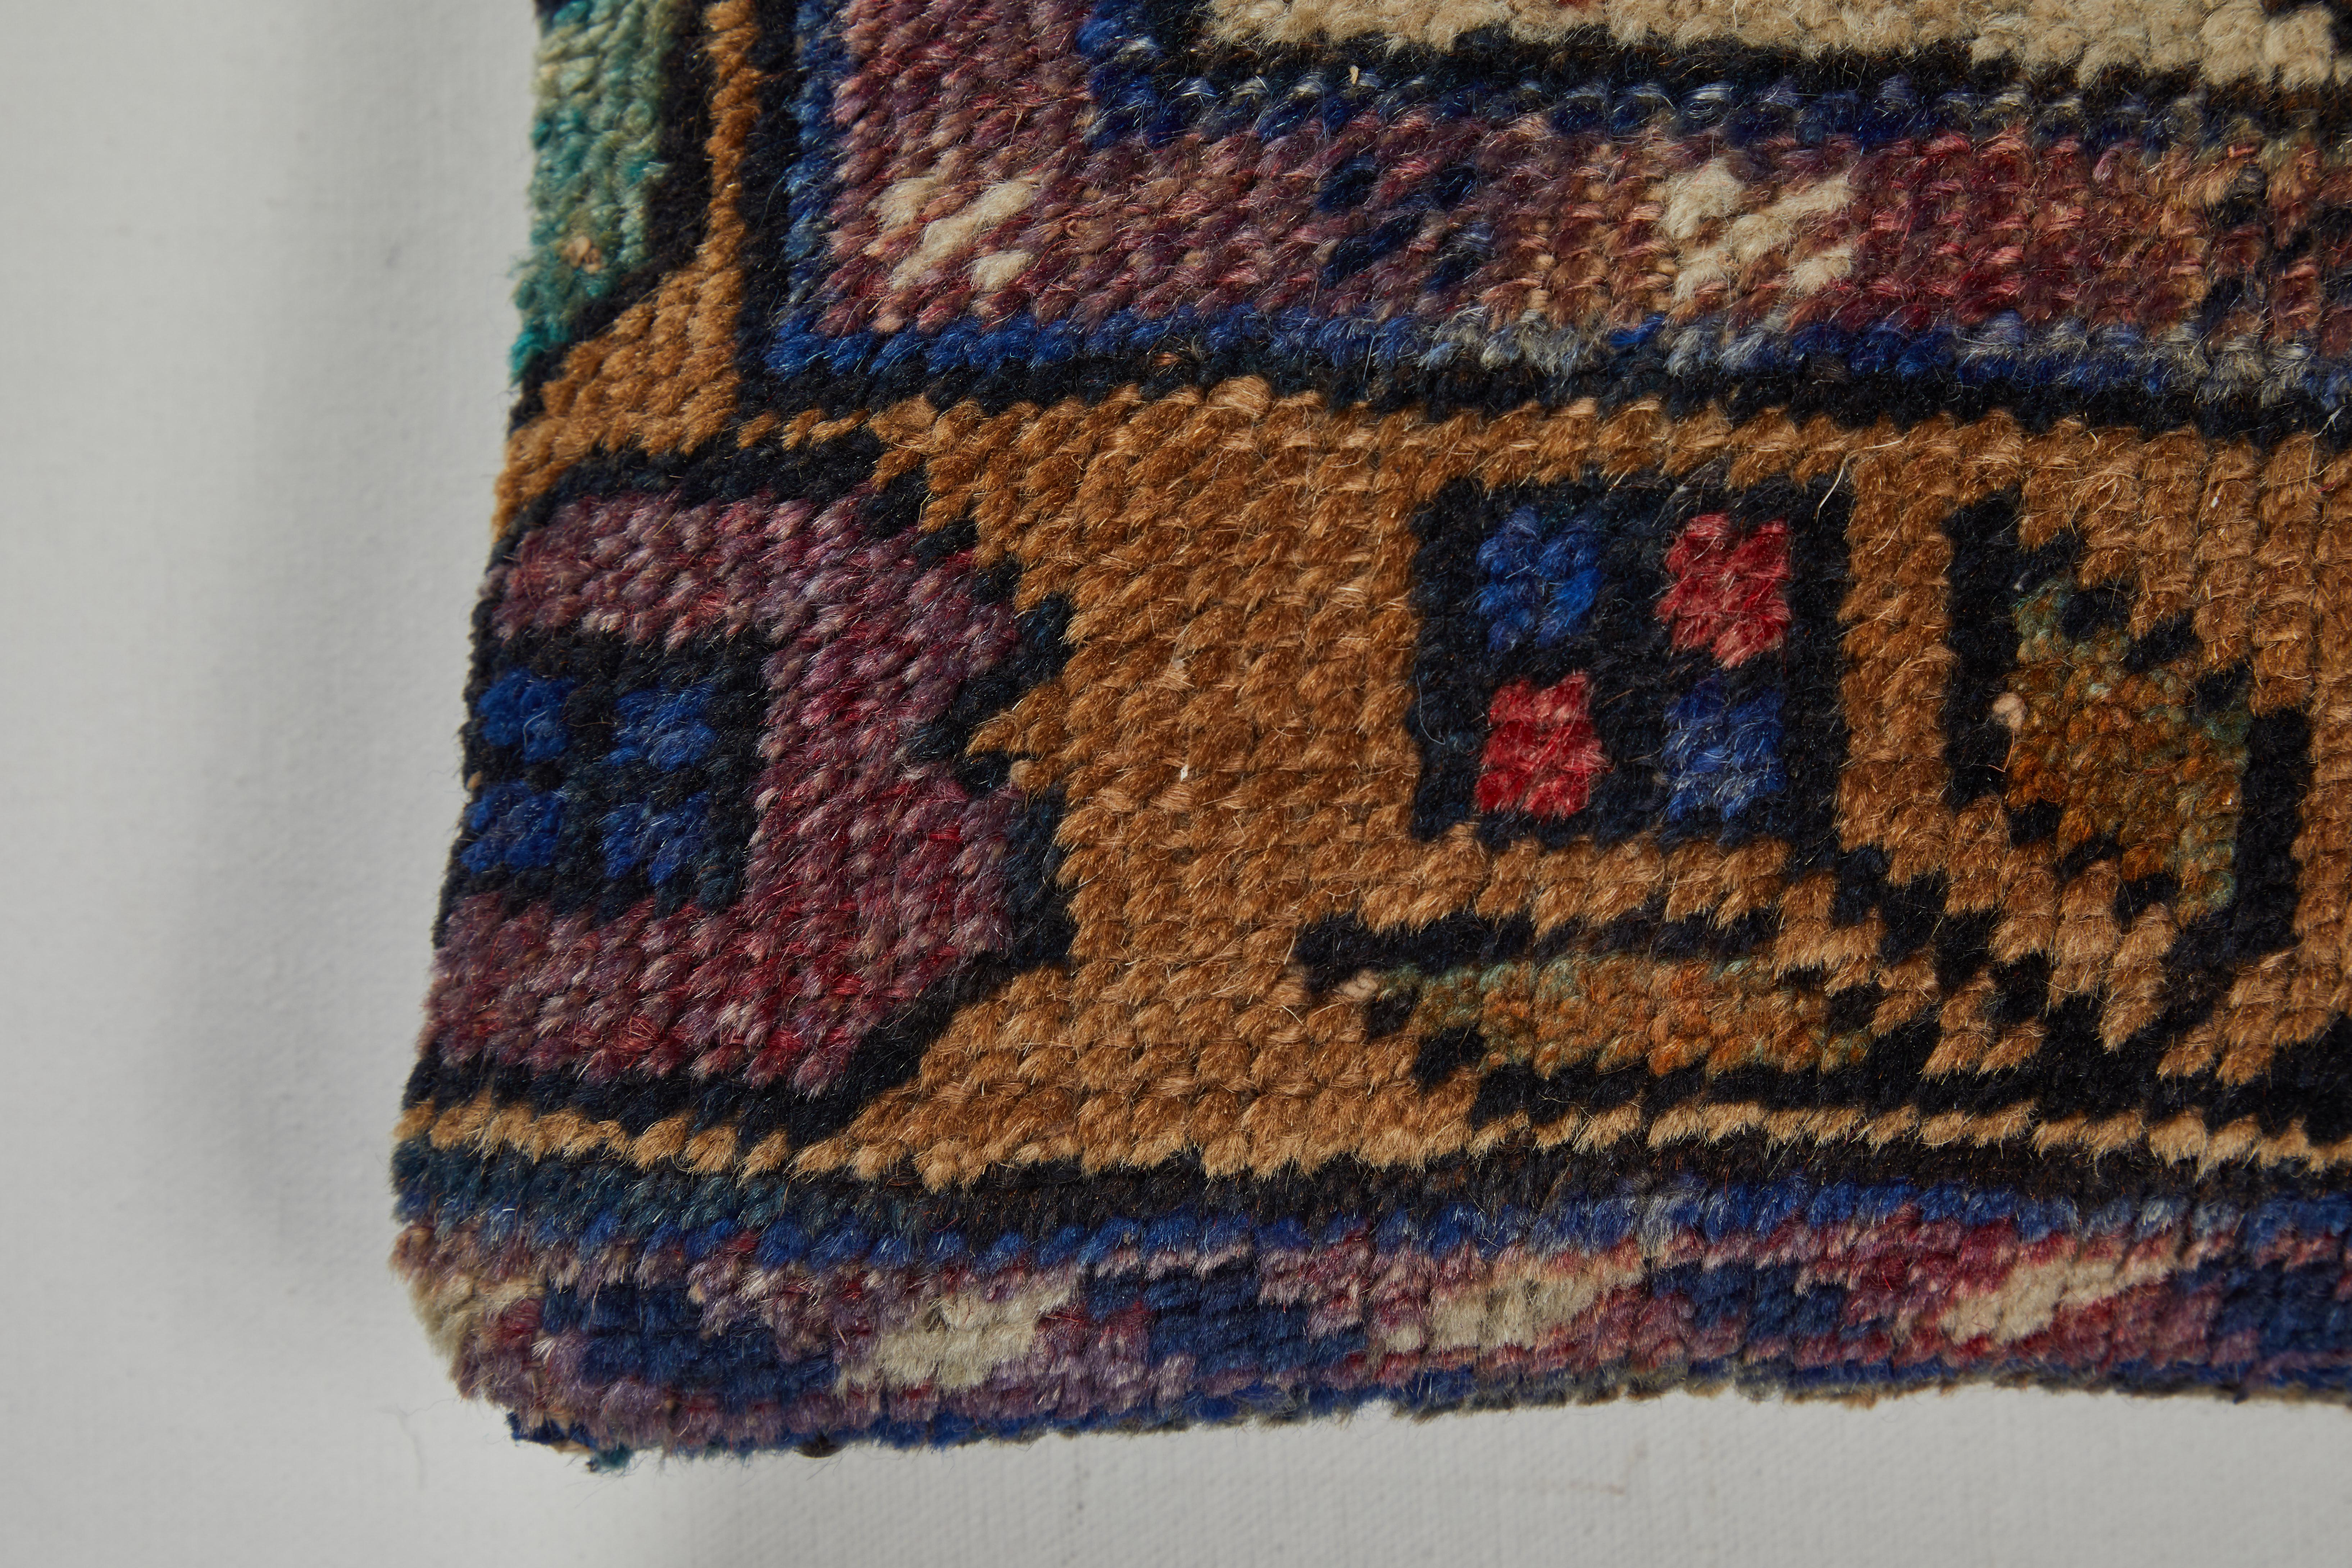 Tribal rug fragment with vase and flowers. Gold, blue, red, green, ivory. Dark grey cotton back. Zipper closure and feather and down fill.